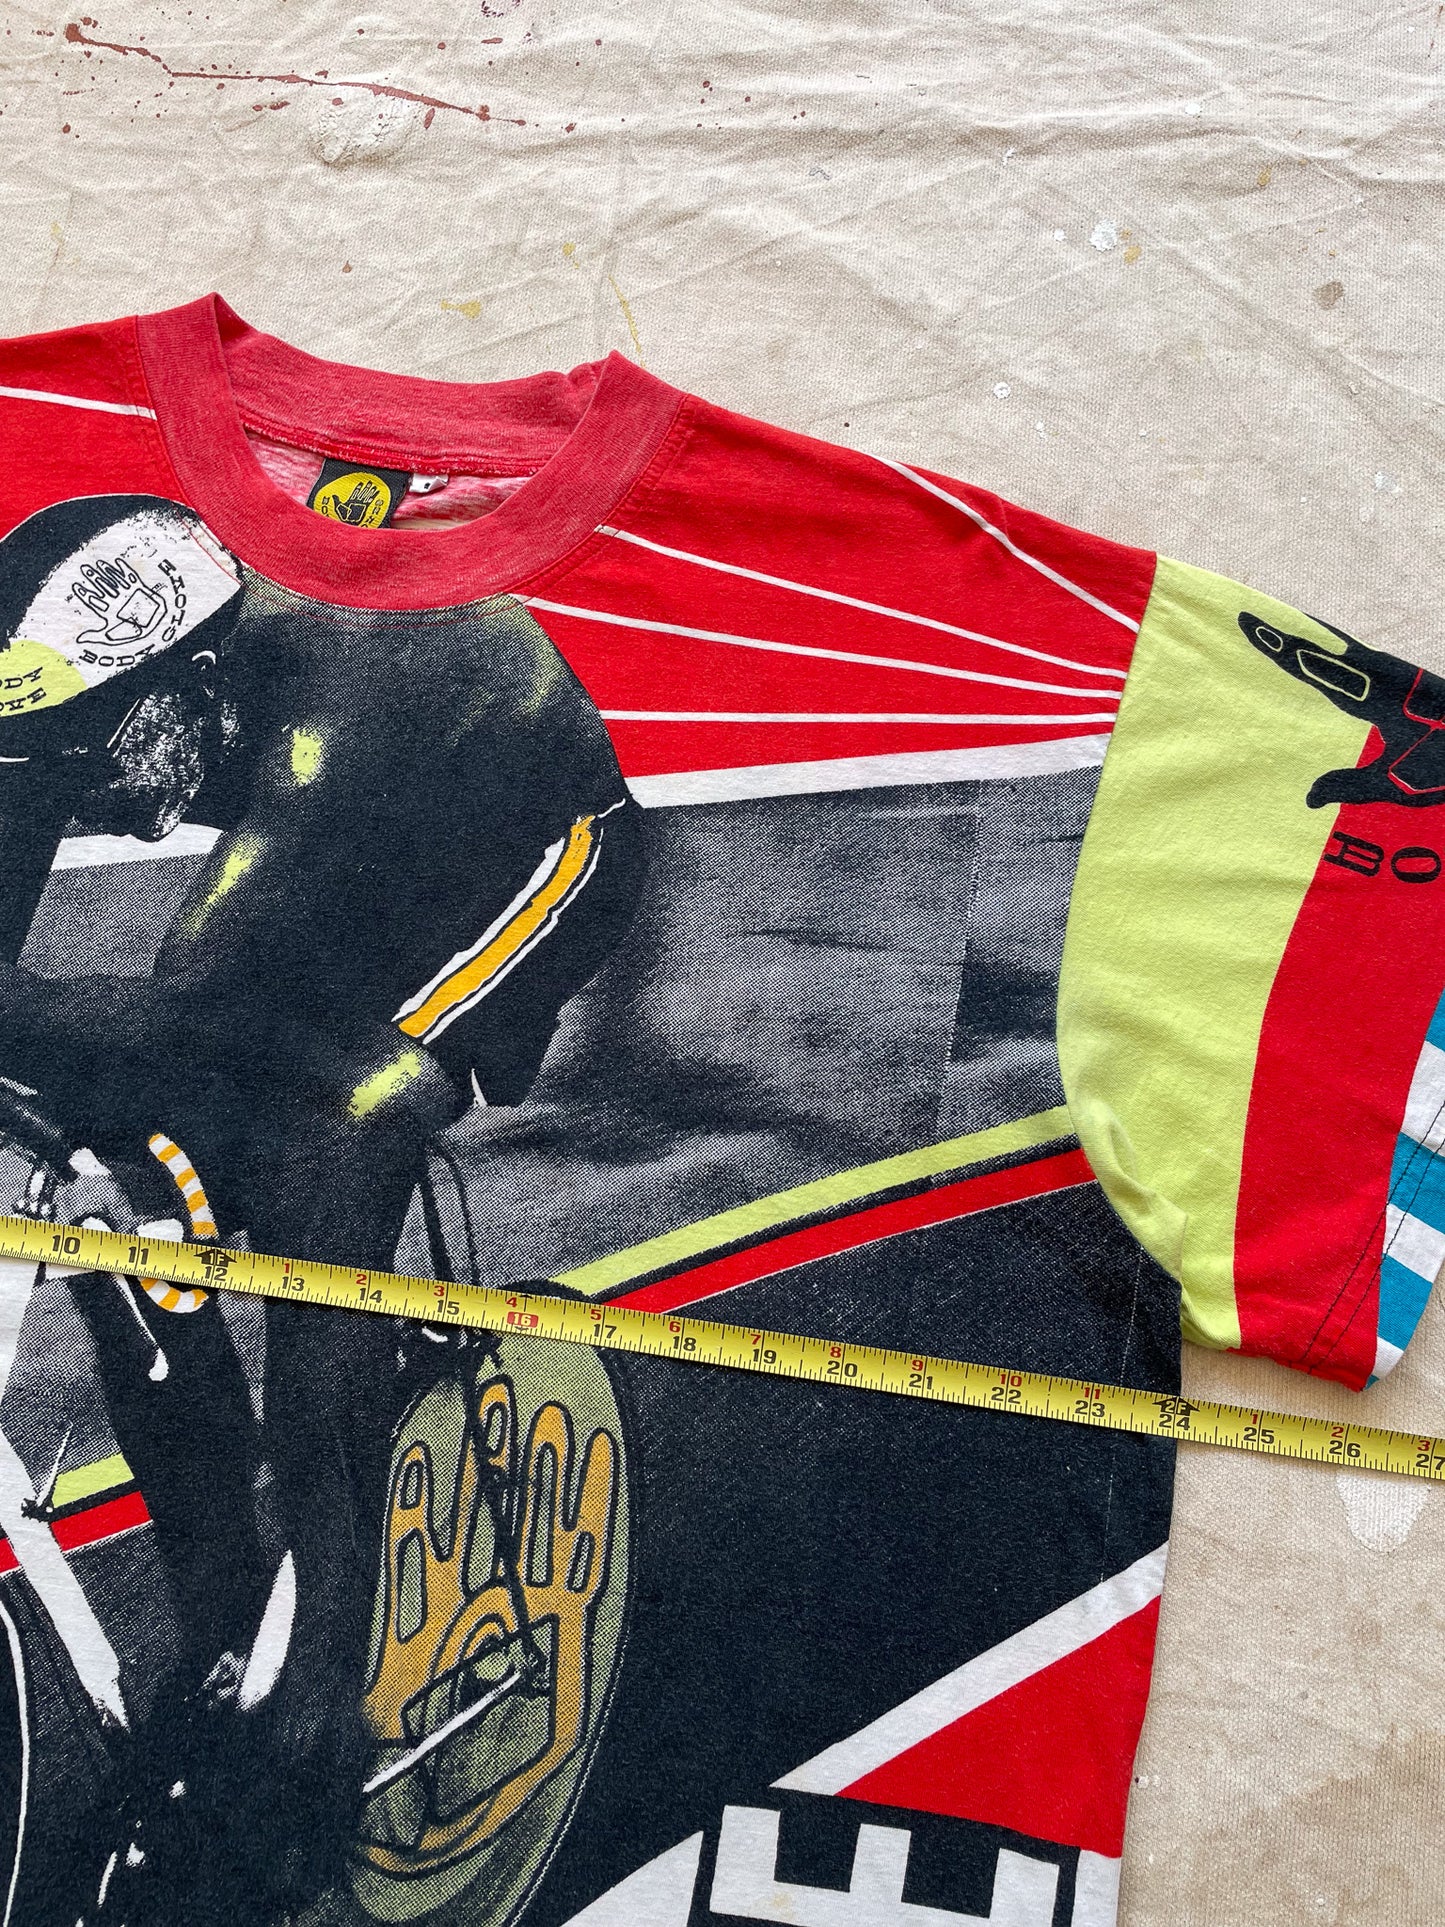 Body Glove All Over Print Cycling T-Shirt—[L]